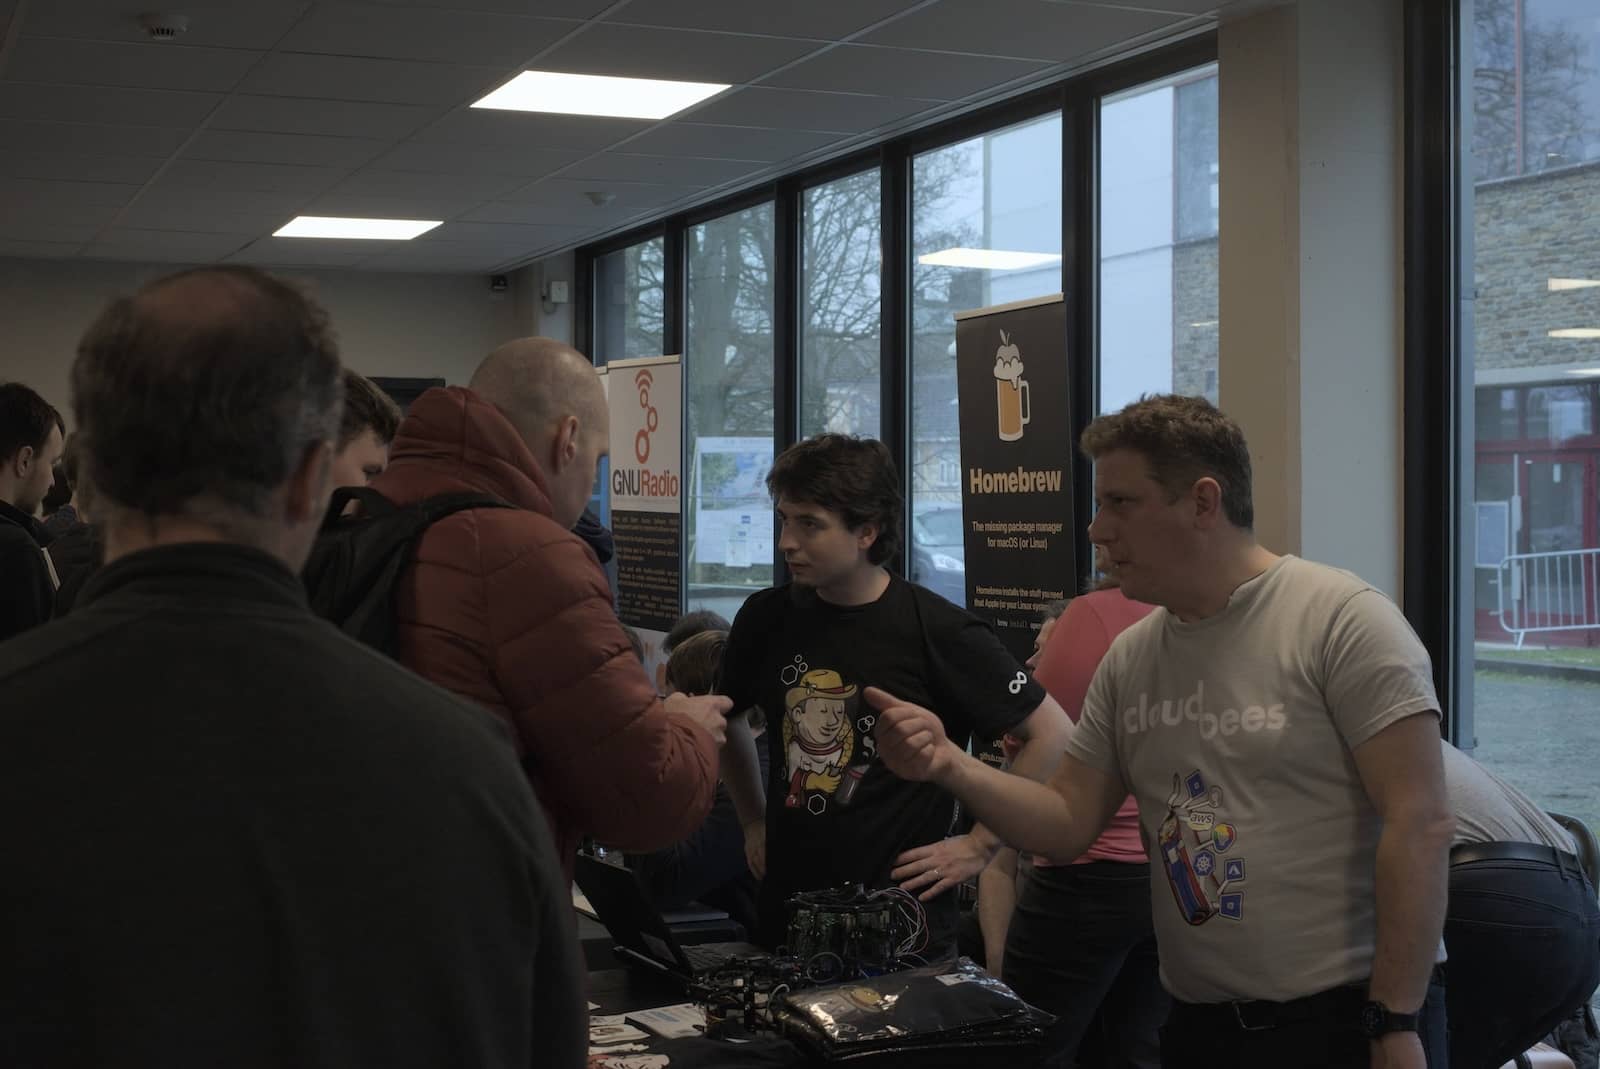 Damien Duportal and Stephane Merle converse with guests to the Jenkins booth at FOSDEM.